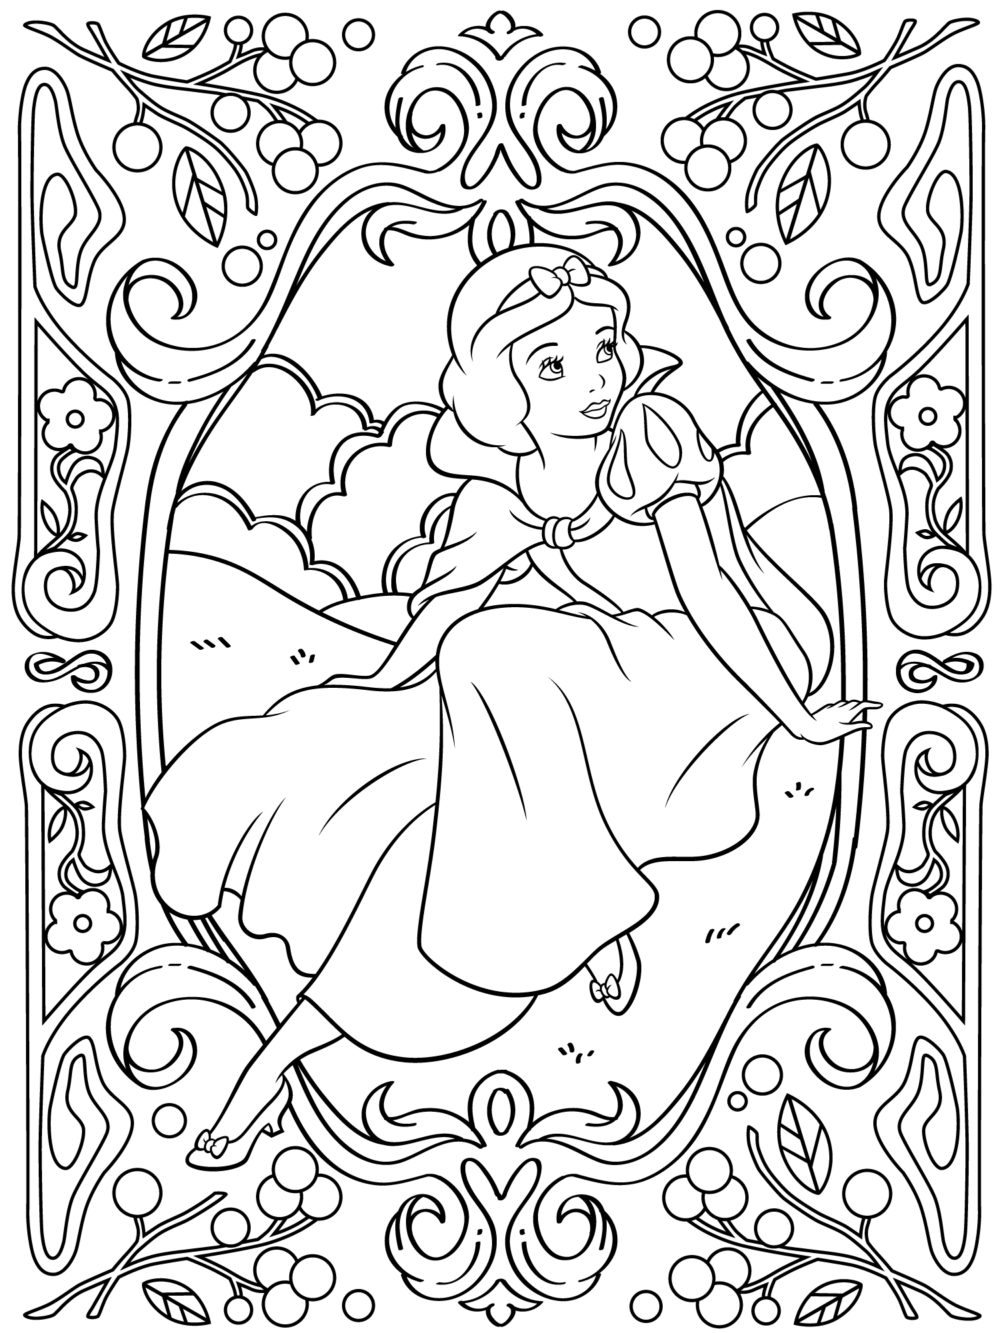 Disney coloring pages for adults